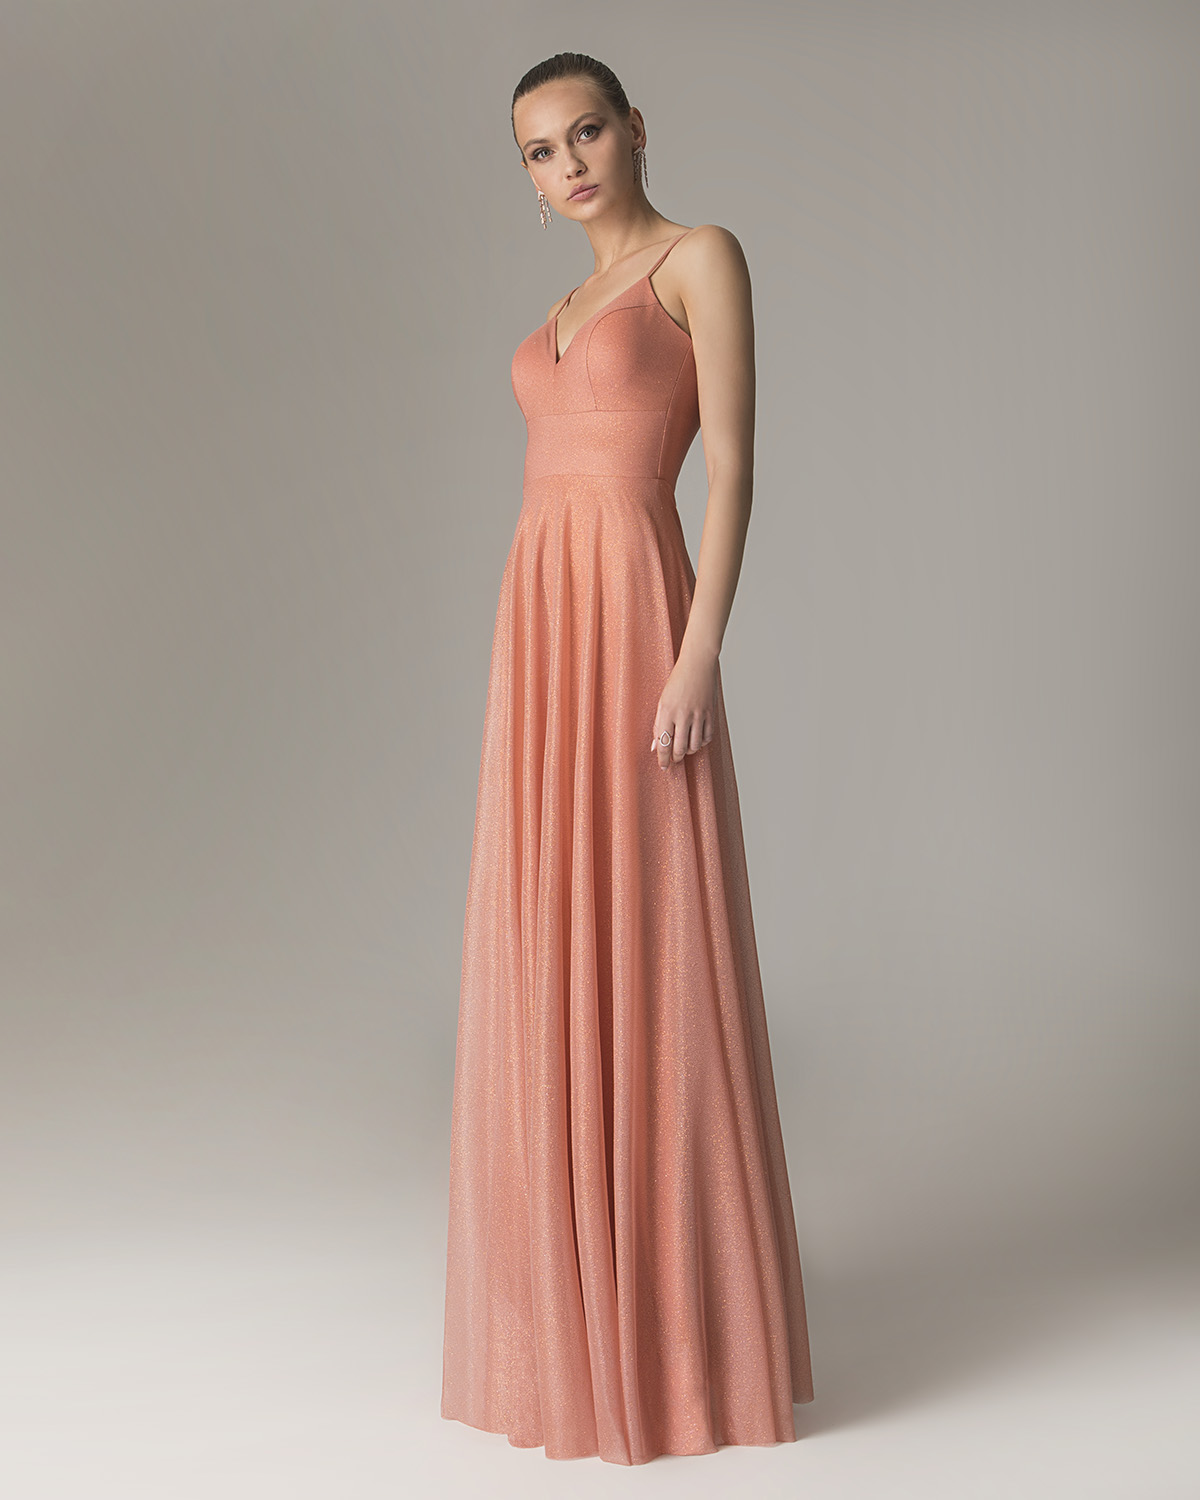 Cocktail Dresses / Long cocktail dress with shining fabric and straps